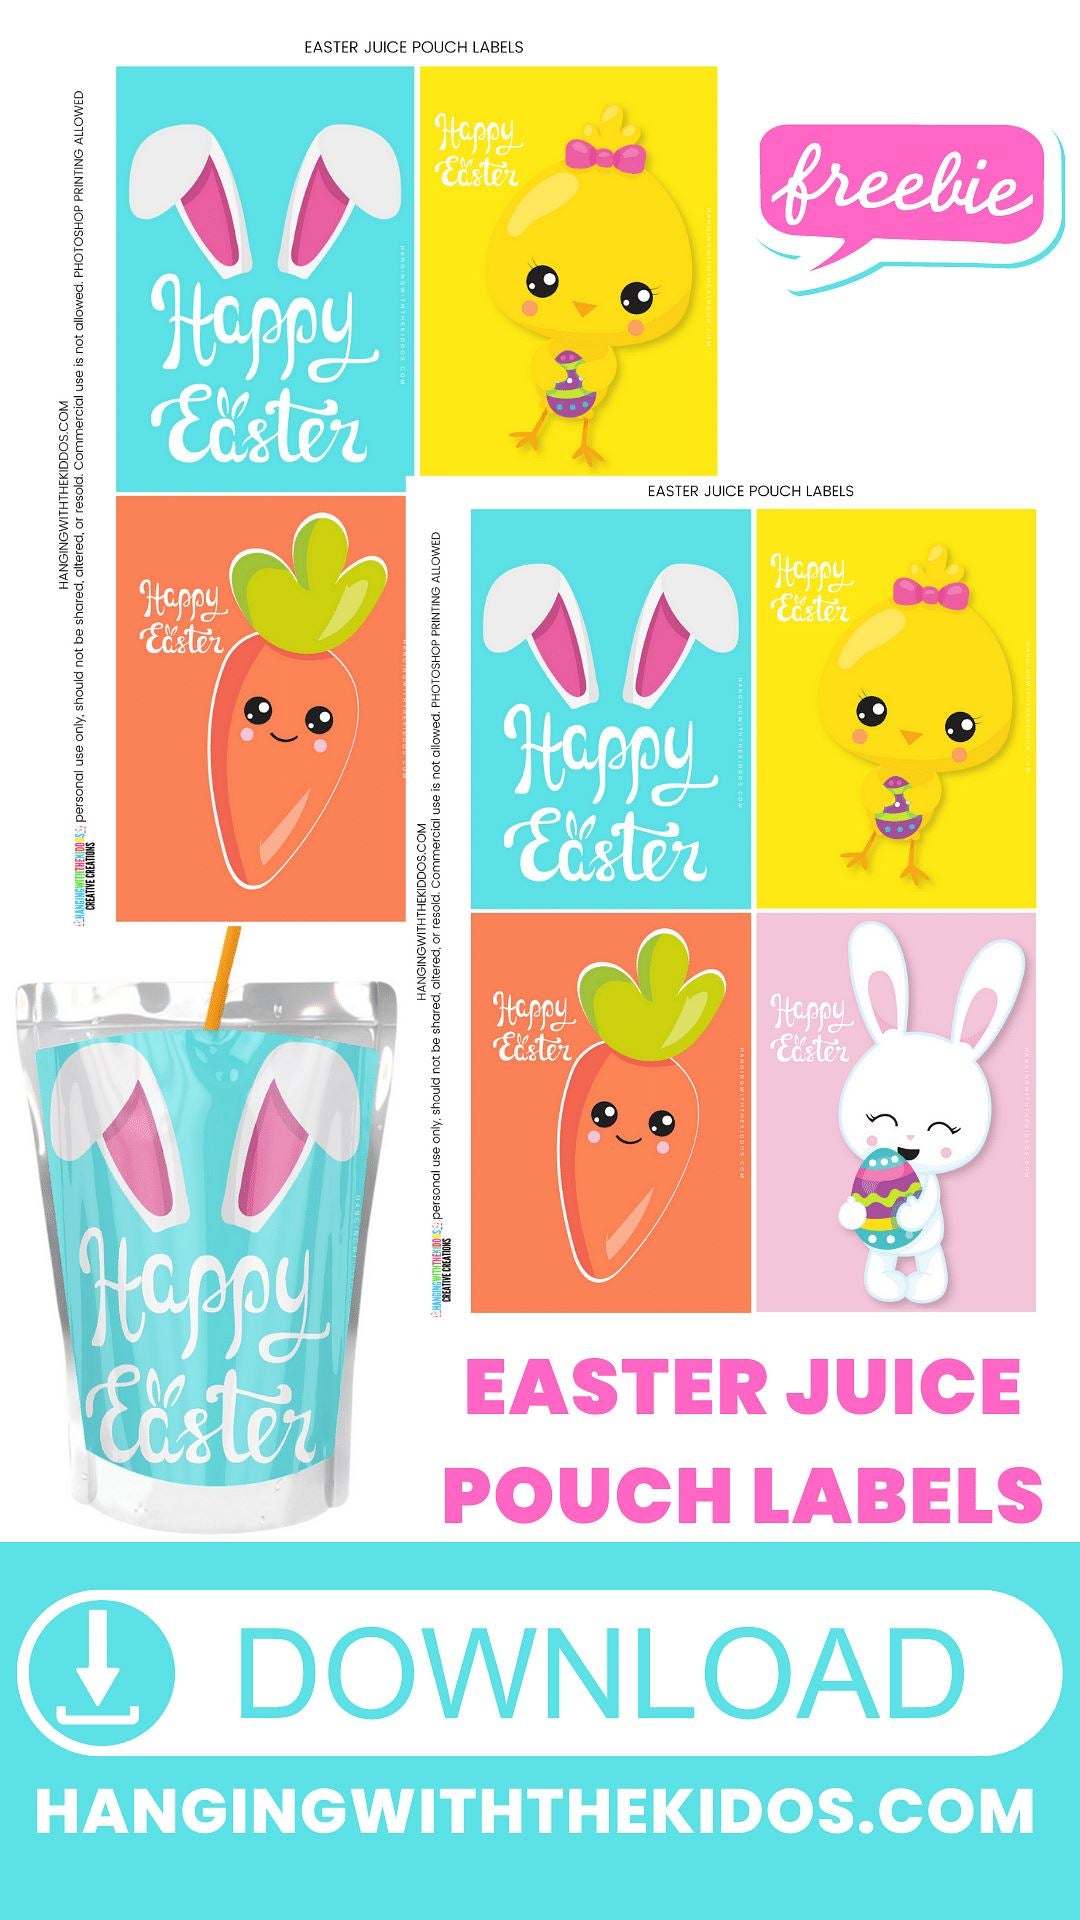 EASTER JUICE POUCH LABELS